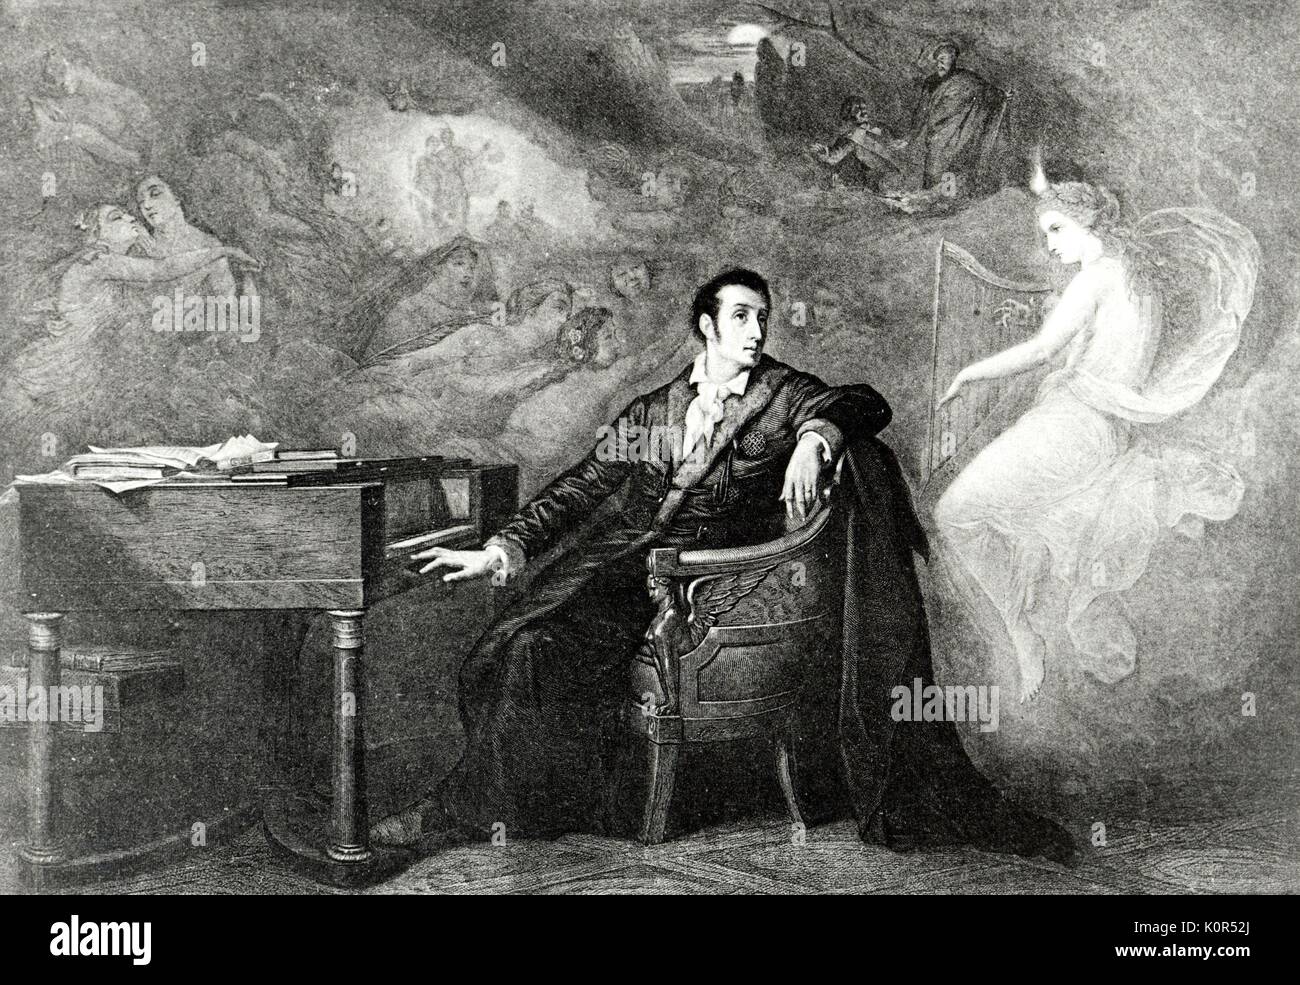 Weber 's last thoughts (Carl Maria von Weber - conductor, composer and pianist, 18–19 November 1786 – 4–5 June 1826). Stock Photo